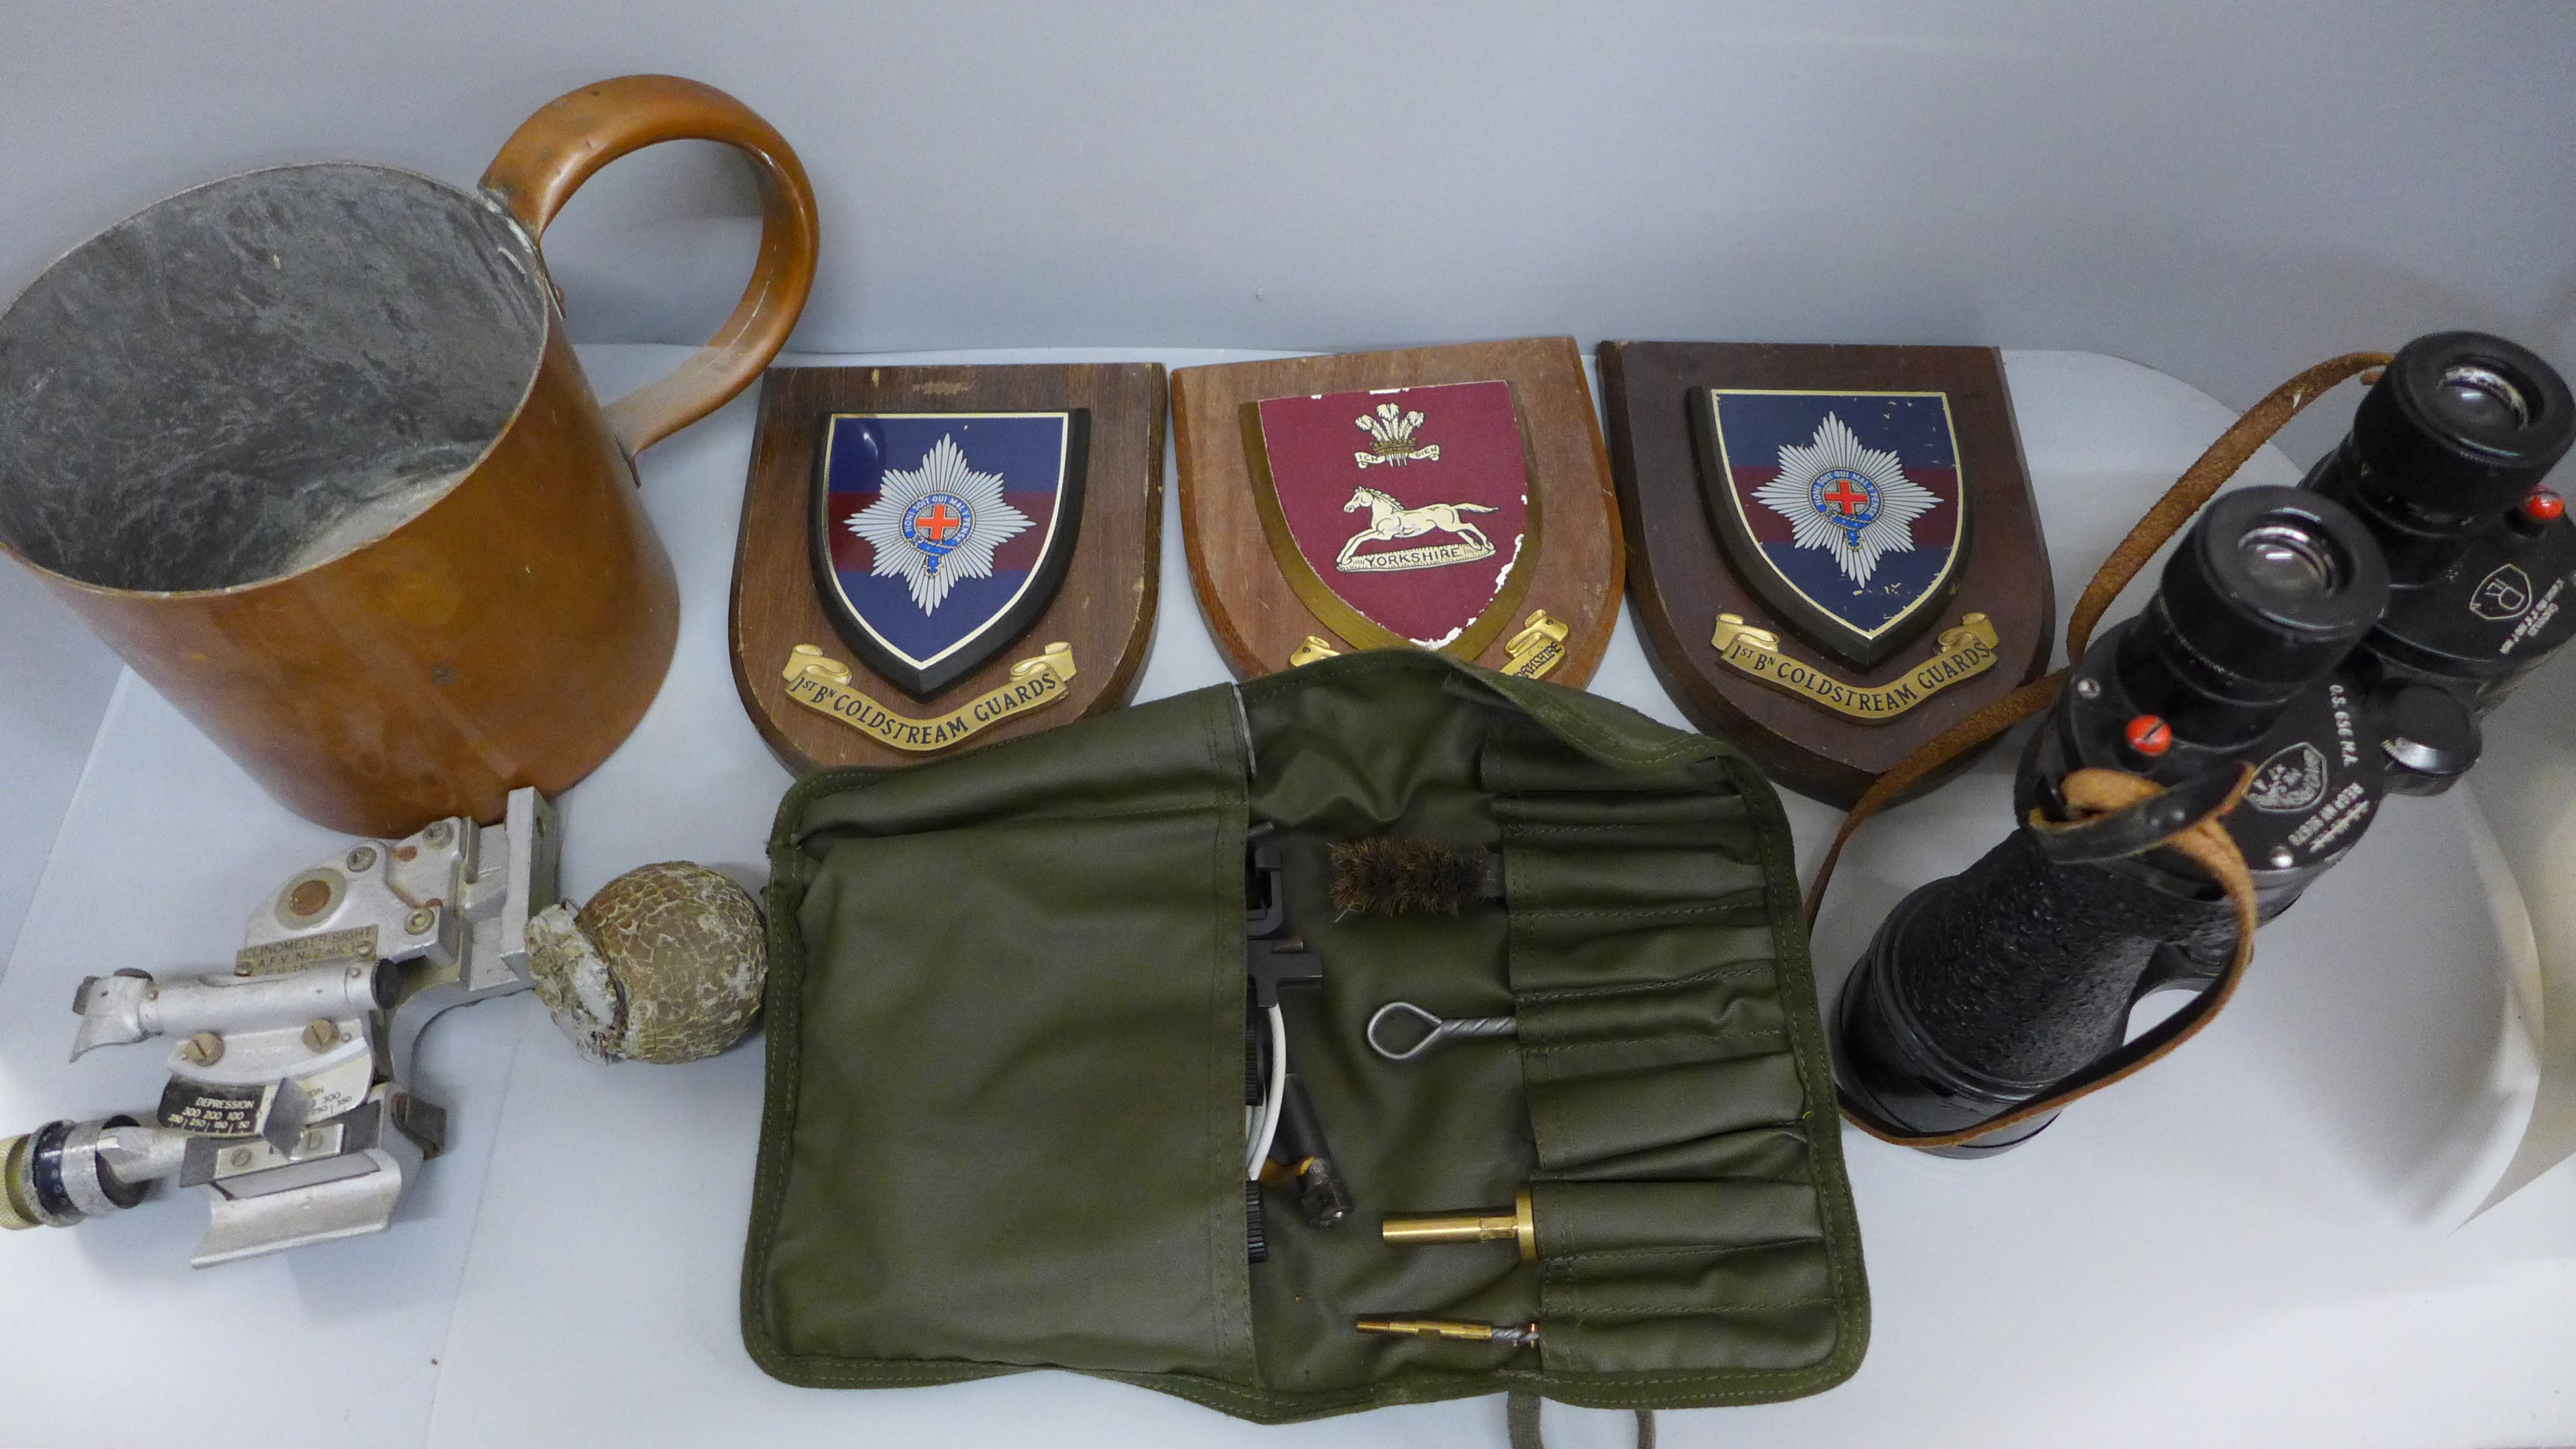 A pair of military Rosi binoculars, an SA80 cleaning kit, a Vickers mk1 tank clinometer sight and